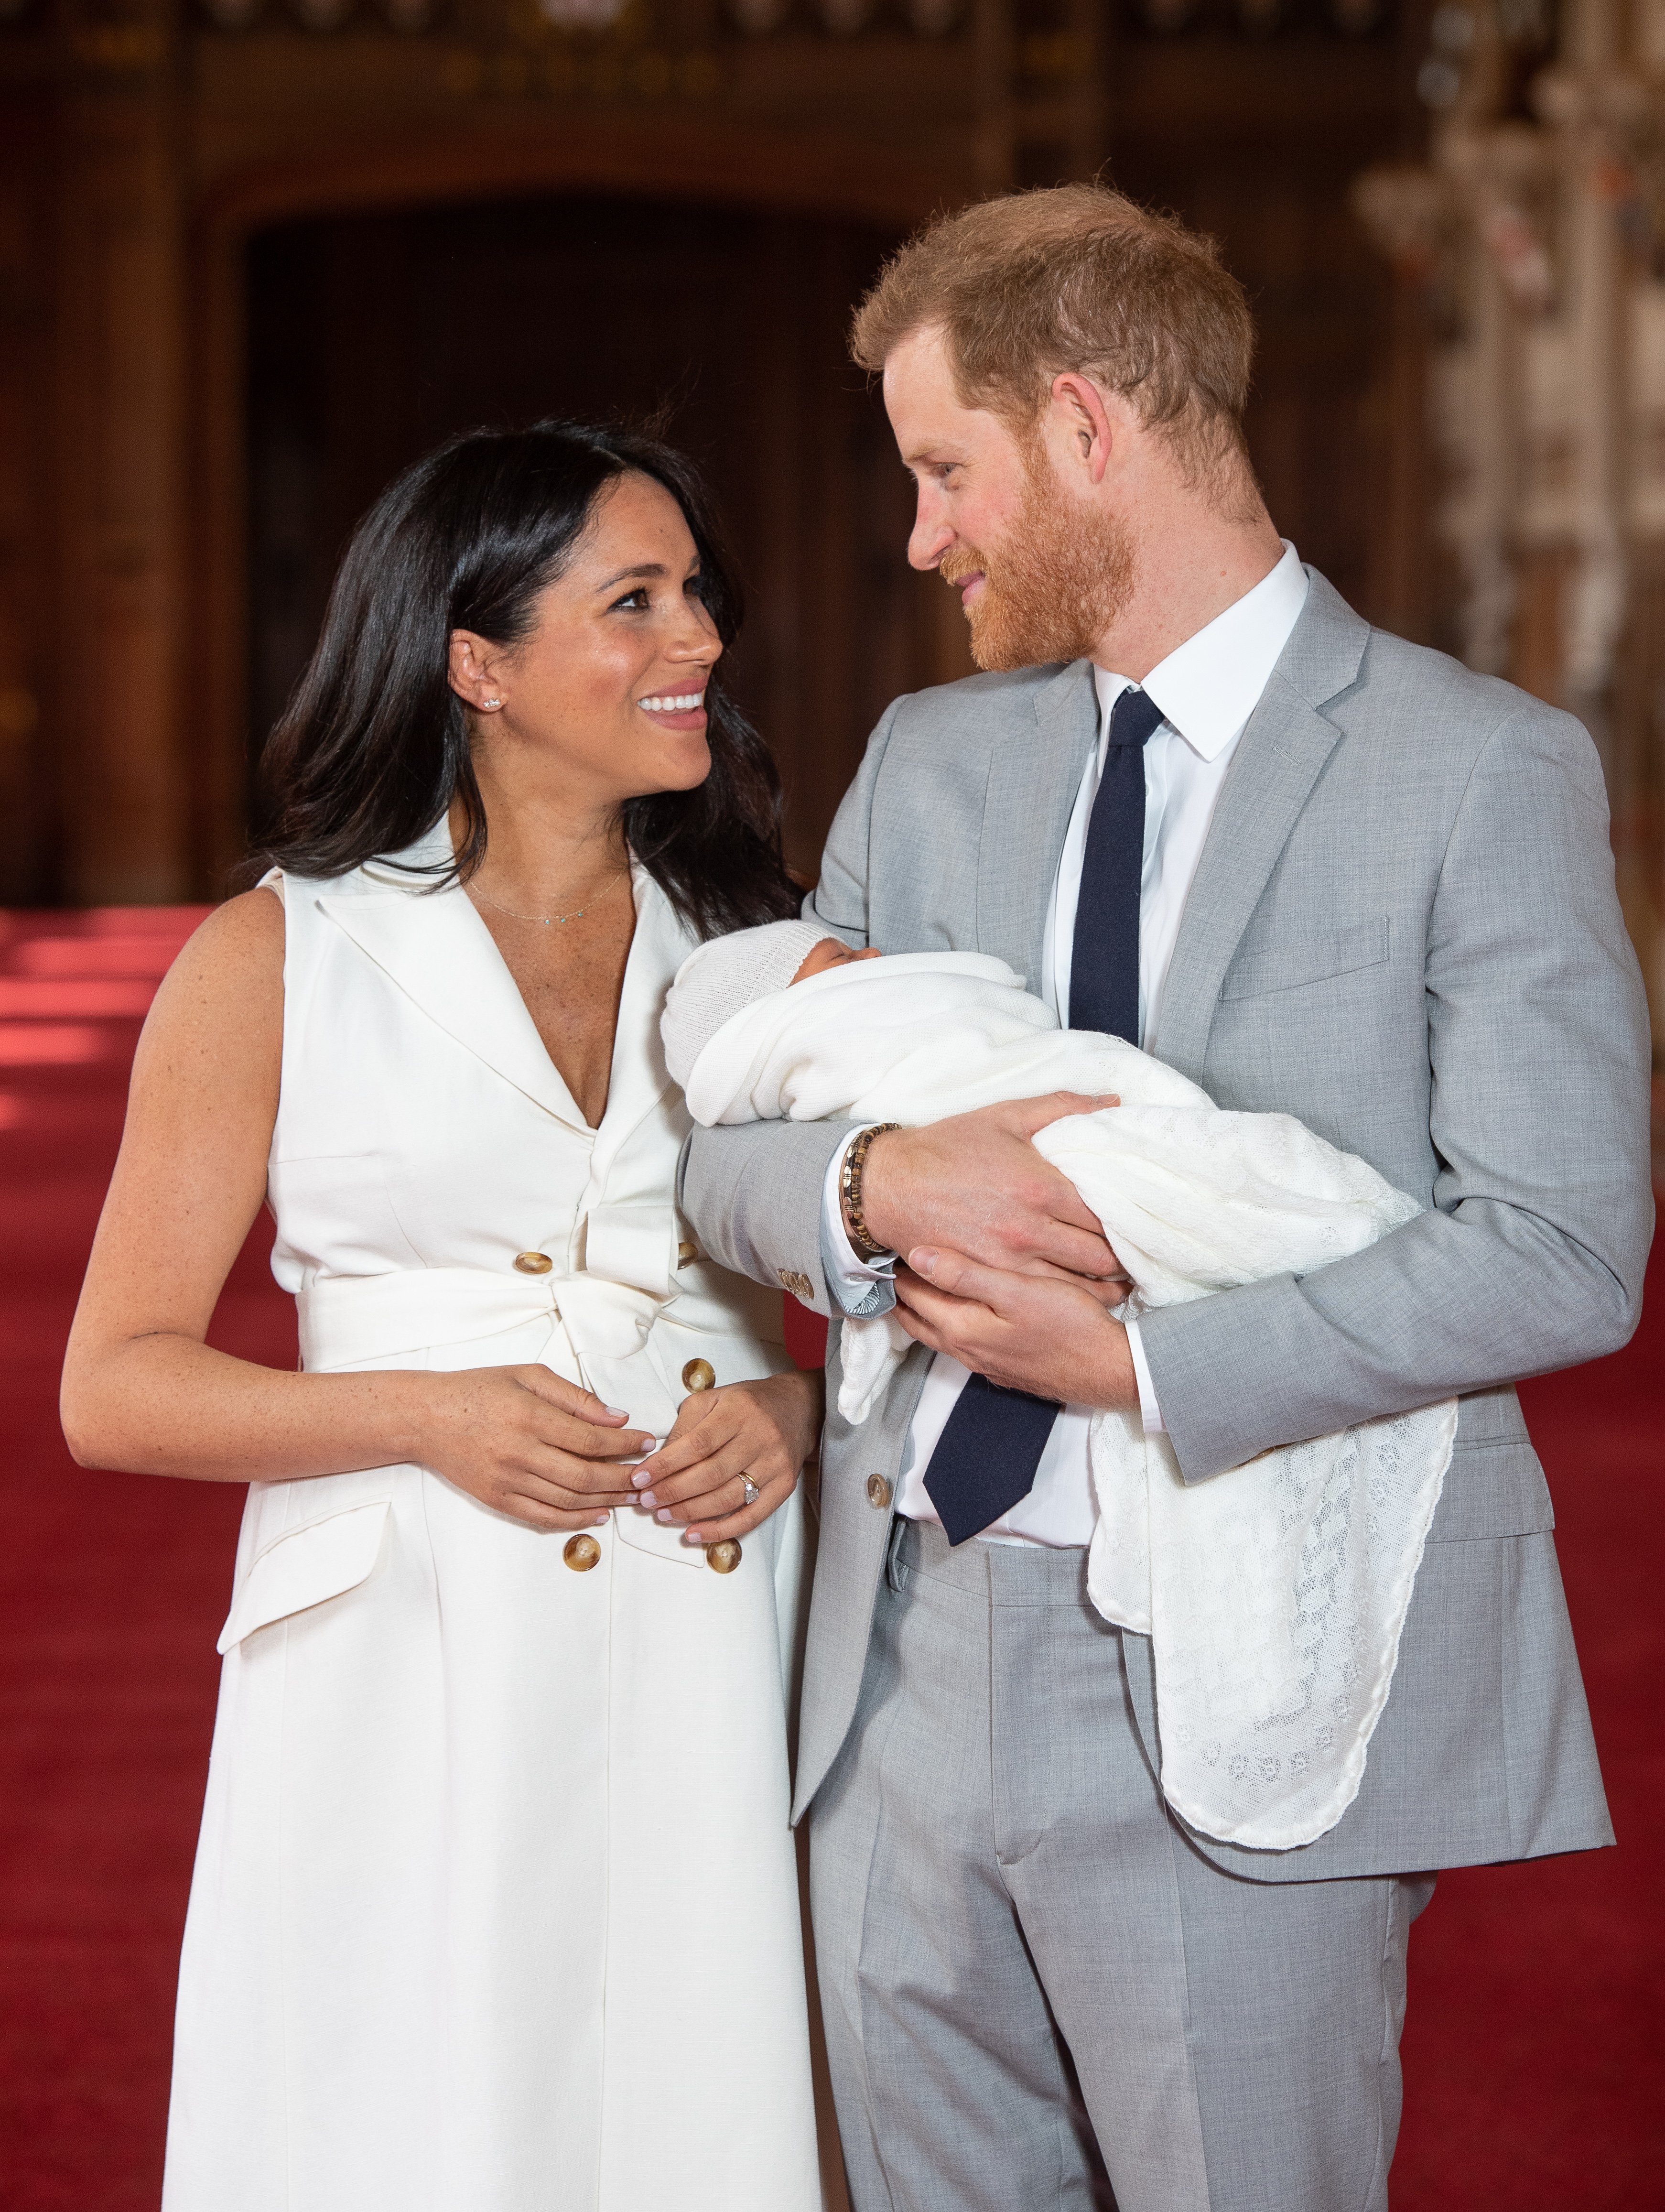 Prince Harry, Duke of Sussex and Meghan, Duchess of Sussex pose with their newborn son Archie Harrison Mountbatten-Windsor during a photocall at St George's Hall at Windsor Castle on May 8, 2019 in Windsor, England |  Source: Getty Images 